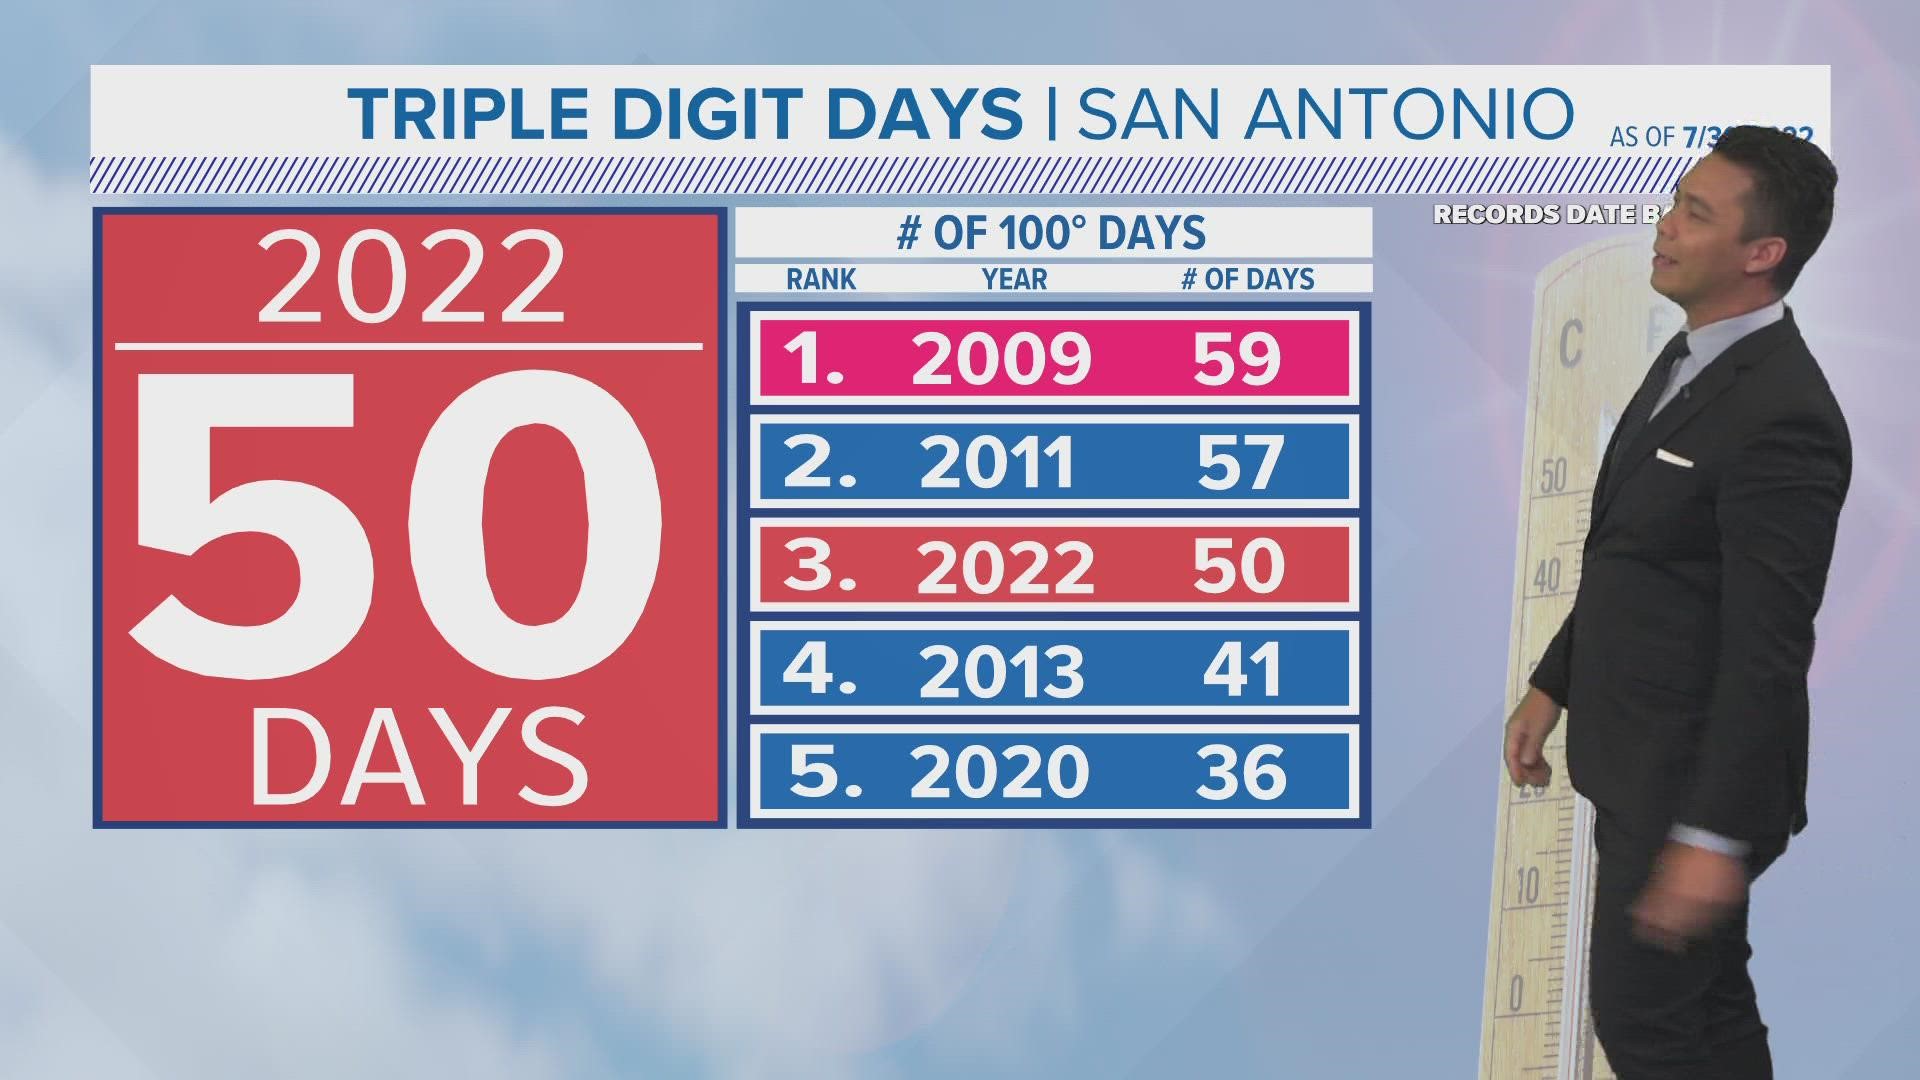 San Antonio hit 50 days of 100 degree weather in July